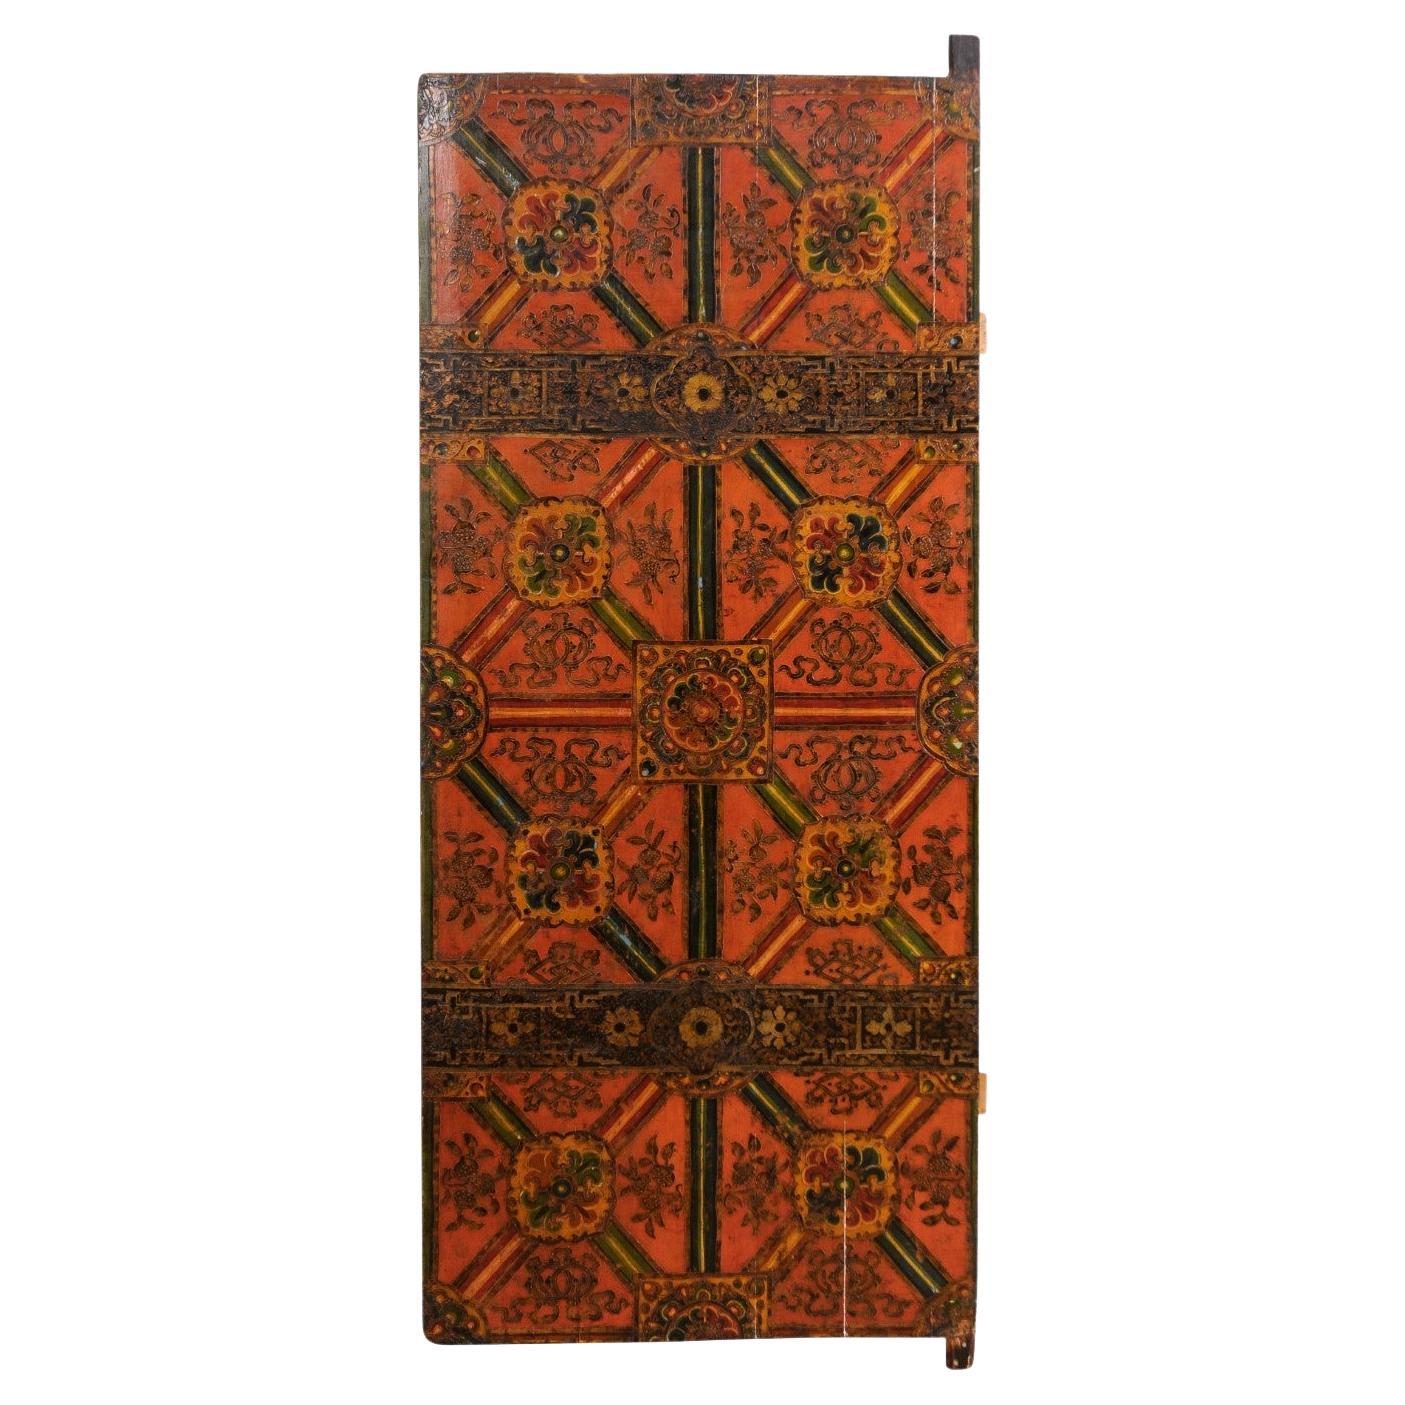 Tibetan Door w/Colorful Hand-Painted Panels in Geometric and Floral Motif